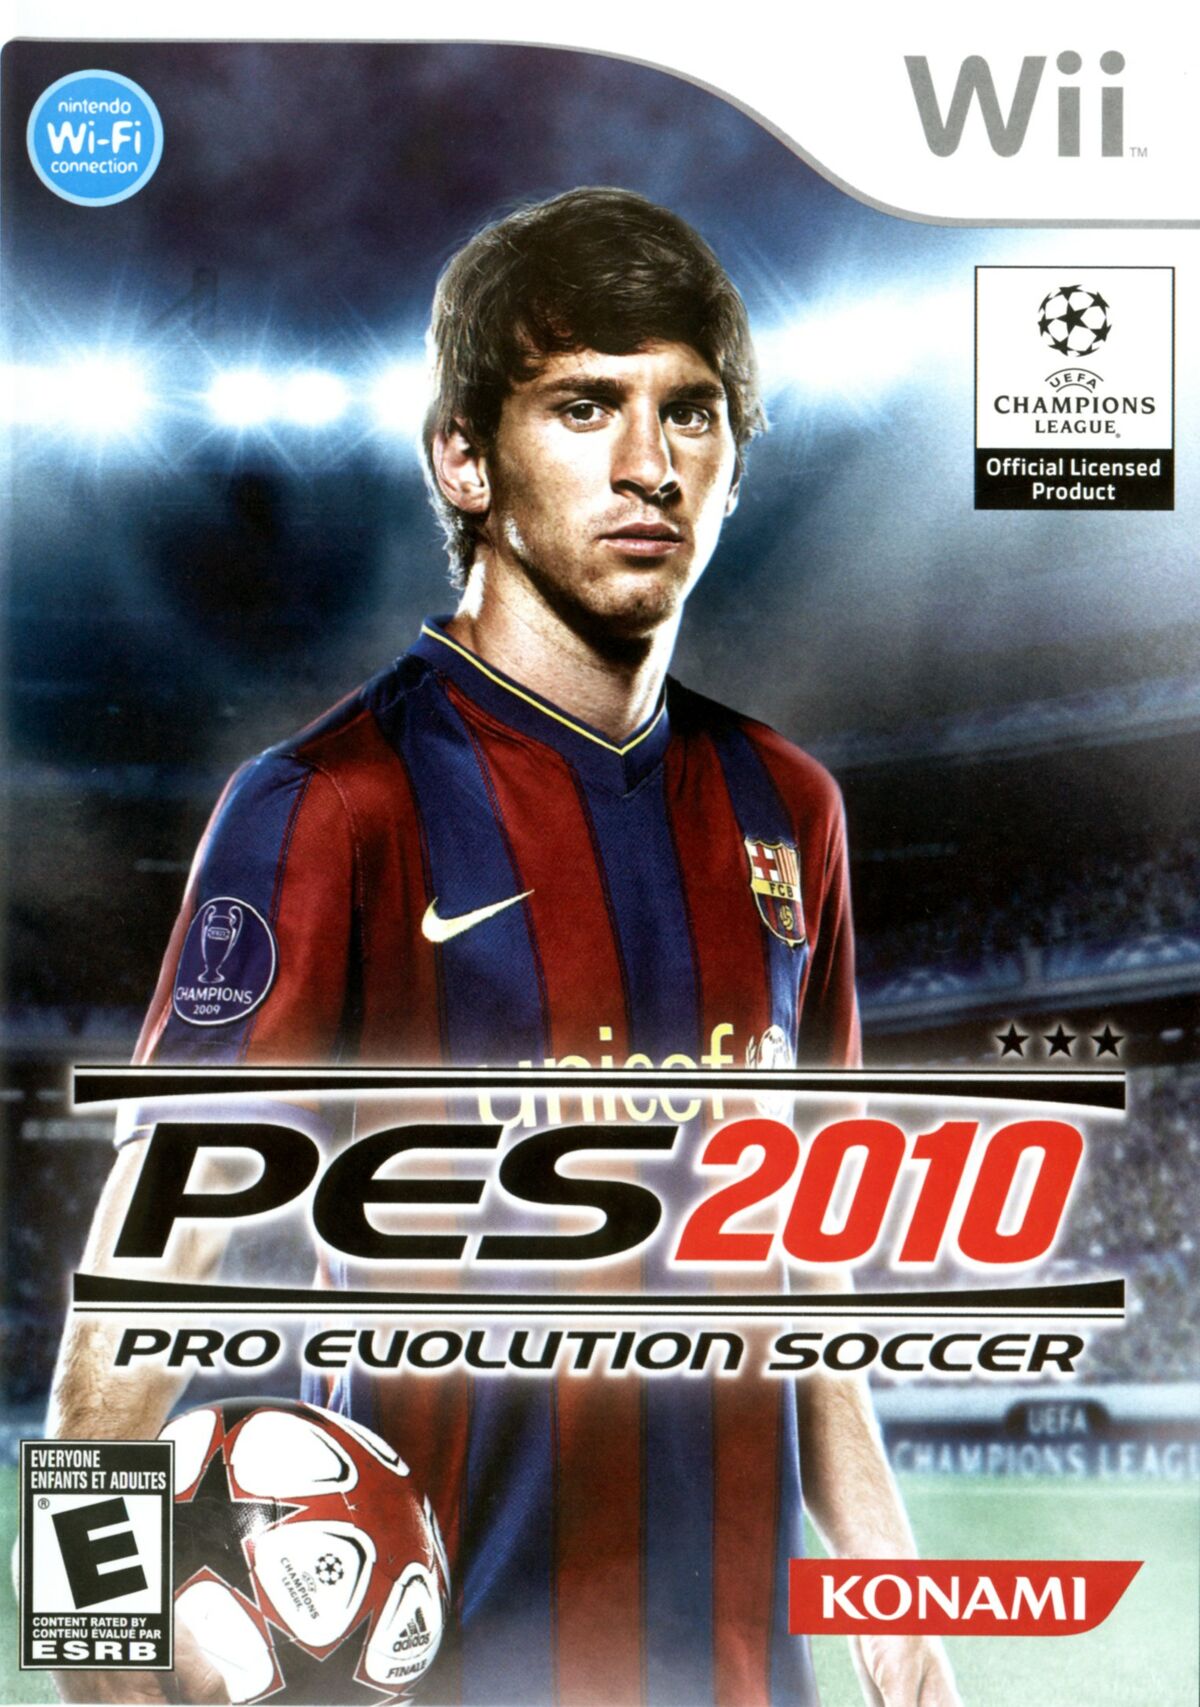 DOWNLOAD PES 2012 Wii Game On Android - Dolphin Emulator 